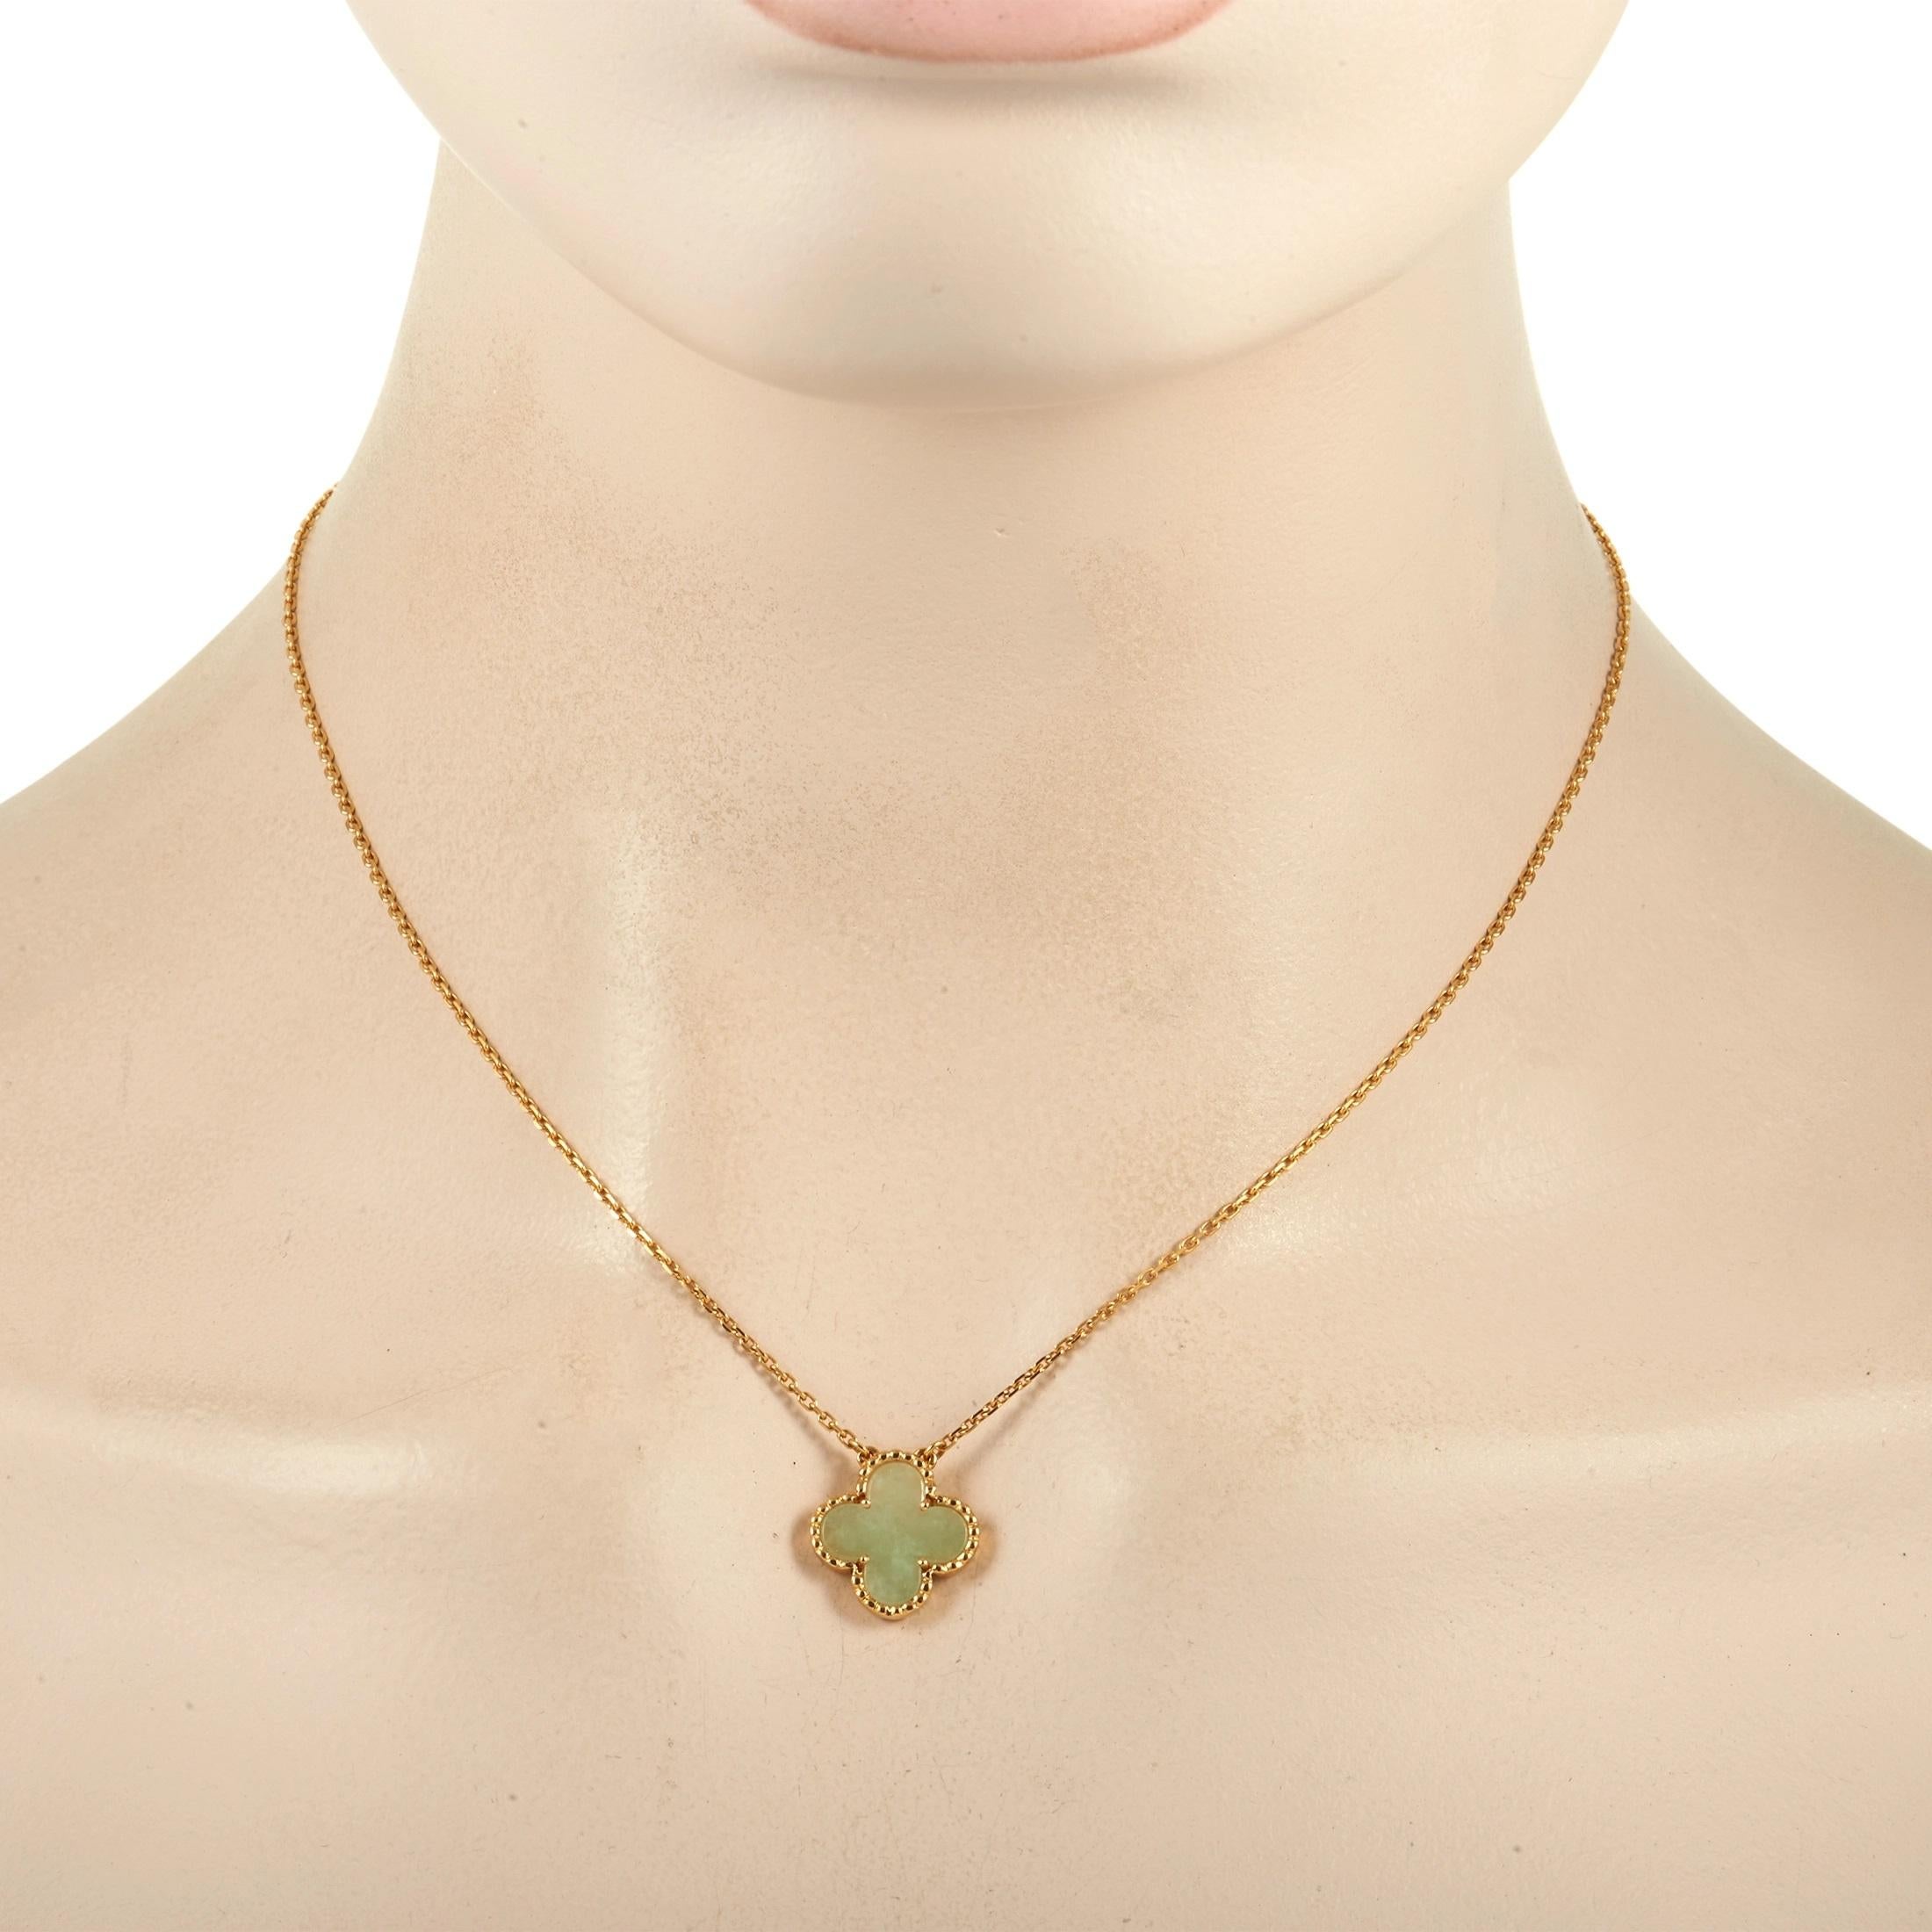 Captivating green Jade and opulent 18K Yellow Gold pair together perfectly on this exquisite vintage pendant necklace from Van Cleef & Arpels. The simple pendant measures 0.5” round and features the brand’s iconic Alhambra design. It’s suspended